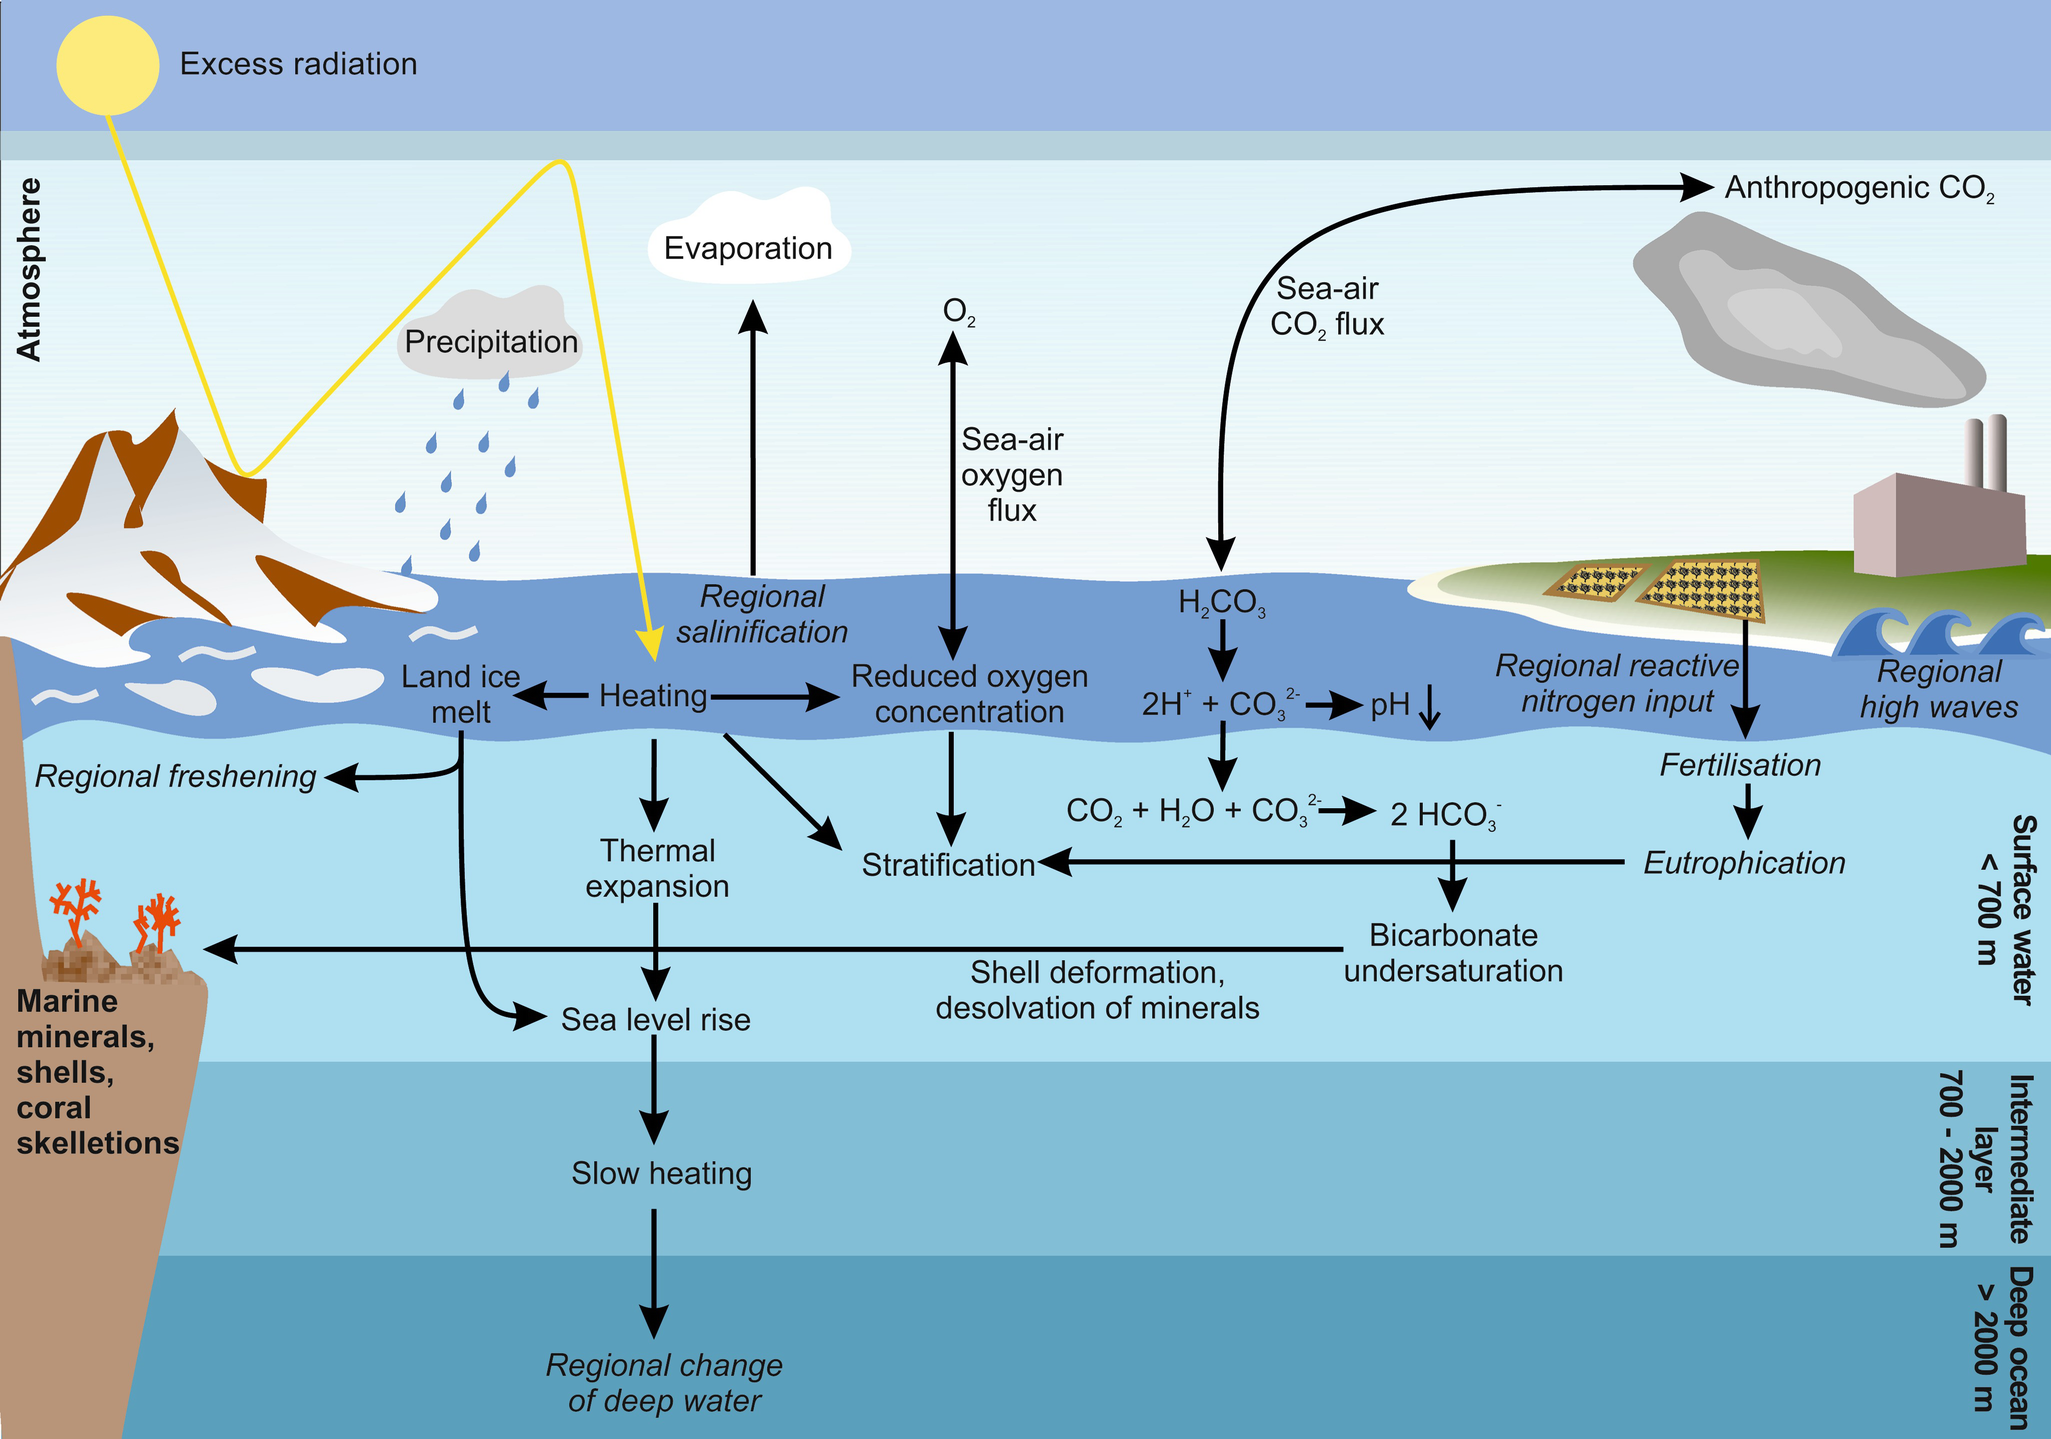 An overview of climate change's effects on the ocean, including the carbon cycle, ocean stratification, sea level rise, and heat transfer.